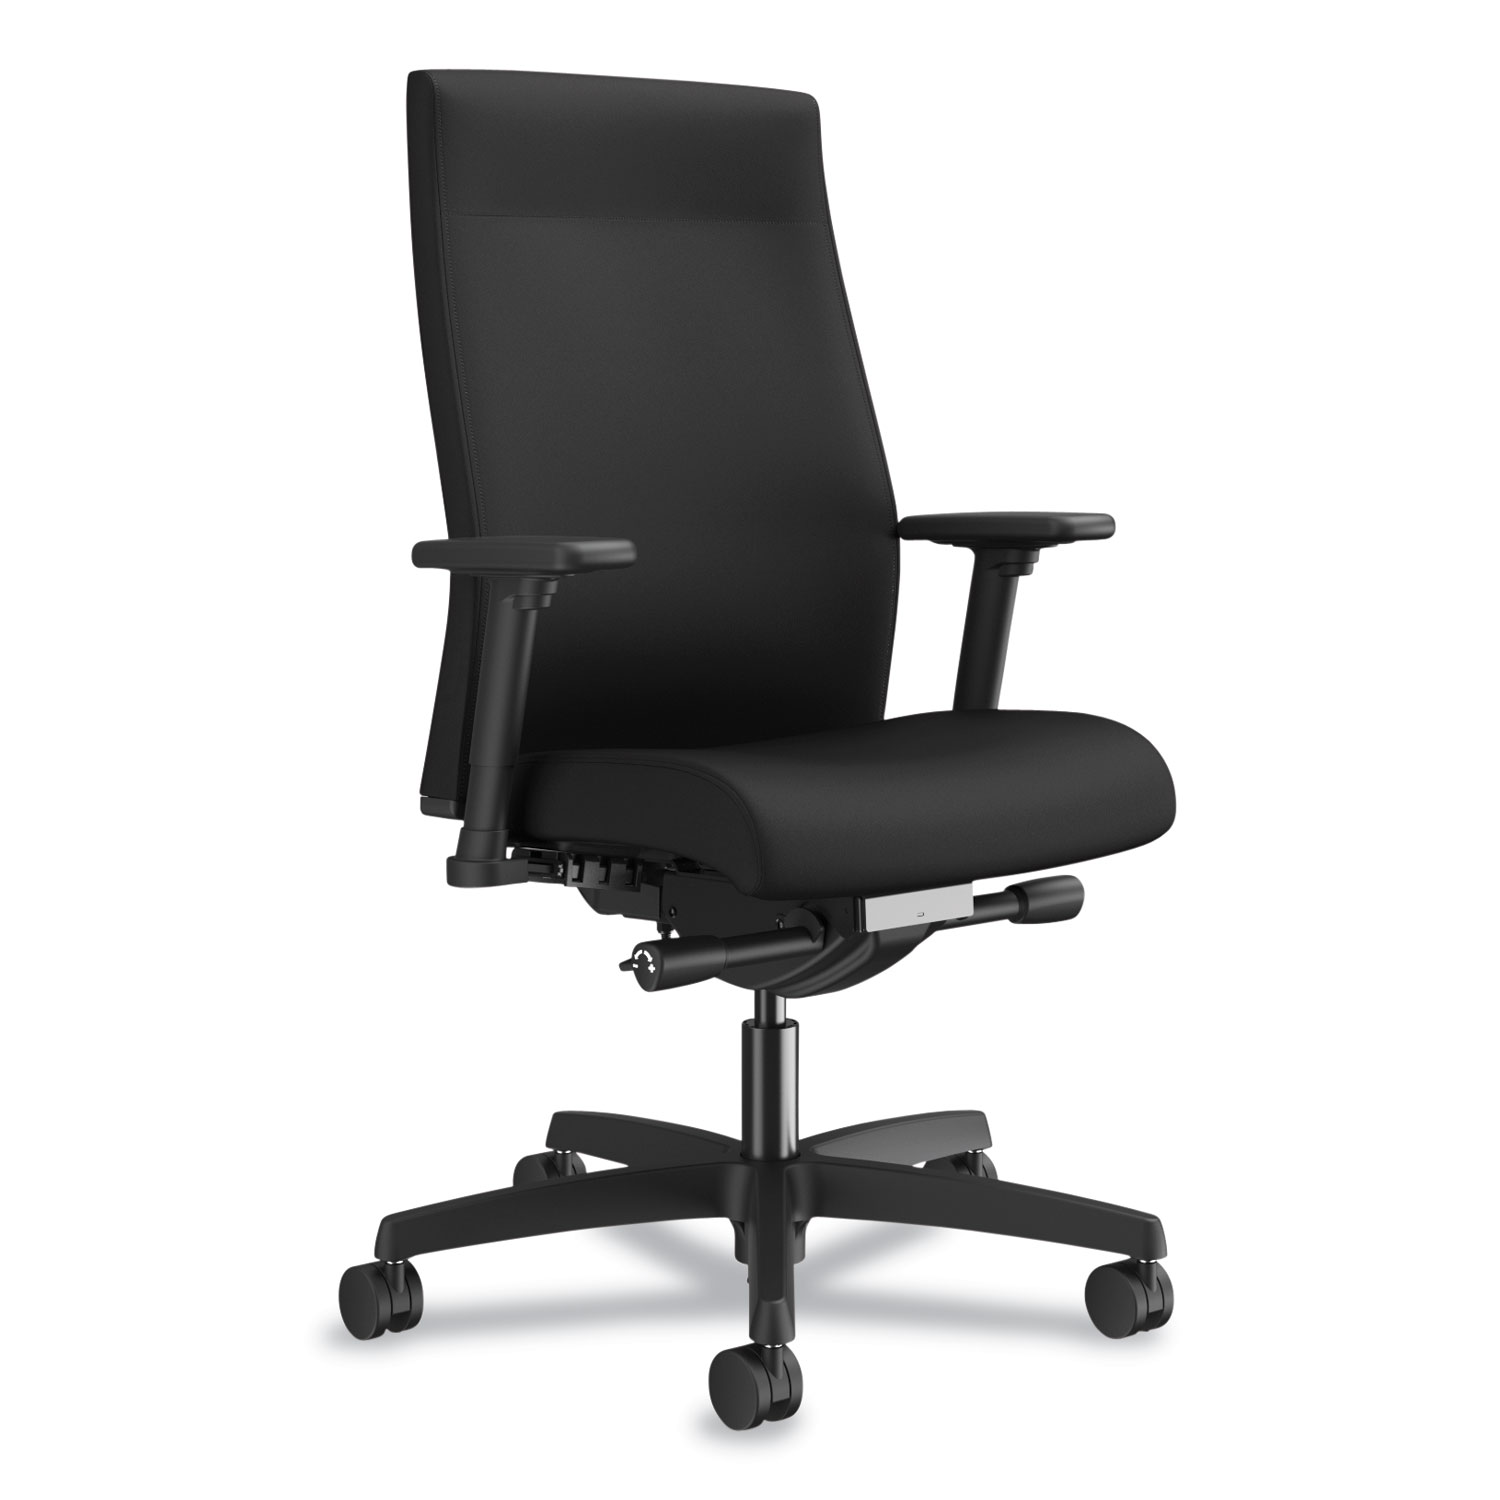  HON HONI2UL2AC10TK Ignition 2.0 Upholstered Mid-Back Task Chair With Lumbar, Supports up to 300 lbs., Black Seat, Black Back, Black Base (HONI2UL2AC10TK) 